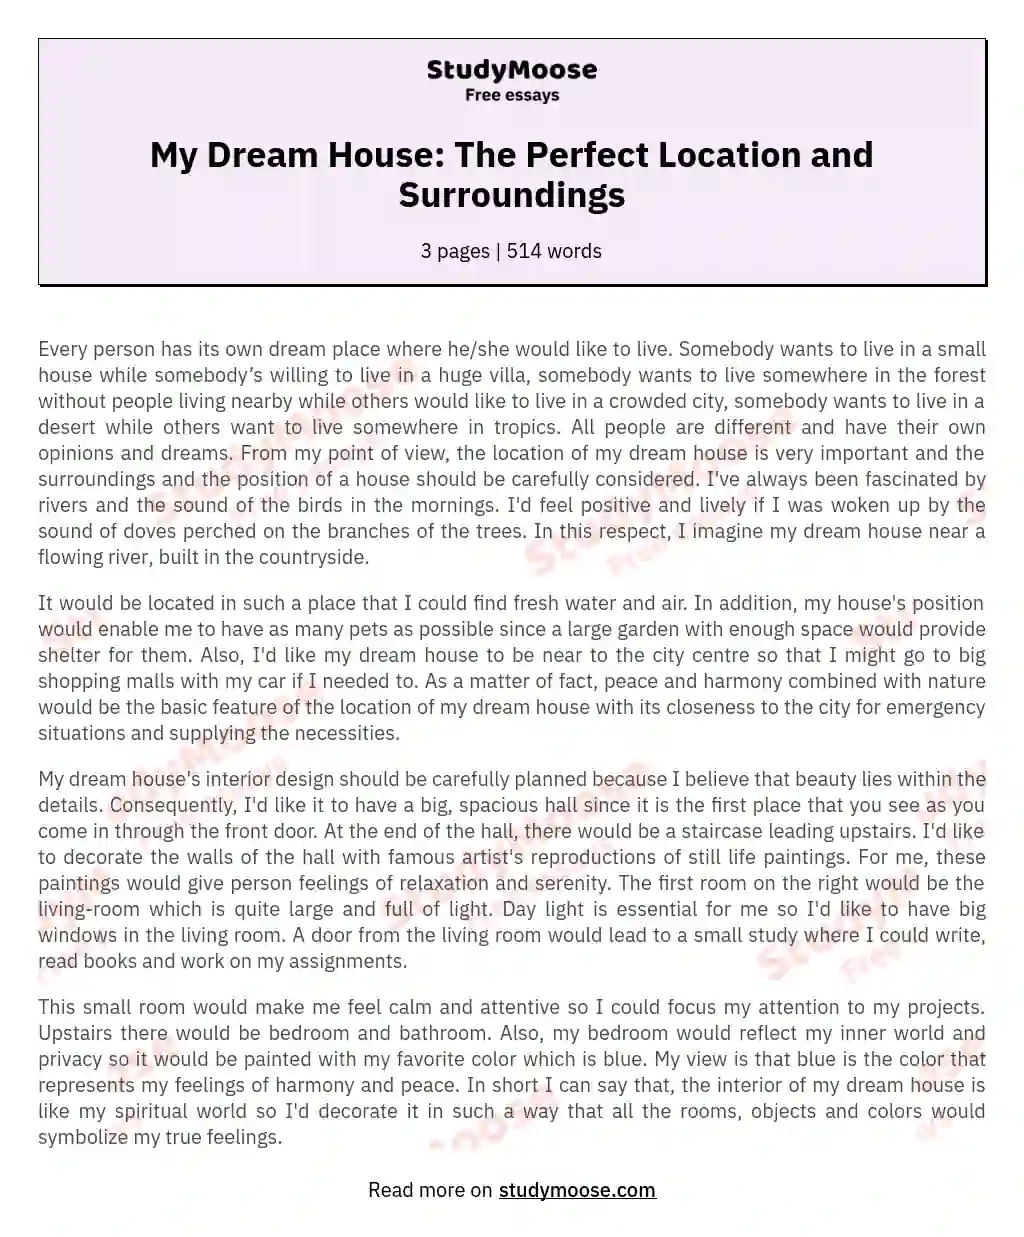 My Dream House: The Perfect Location and Surroundings essay